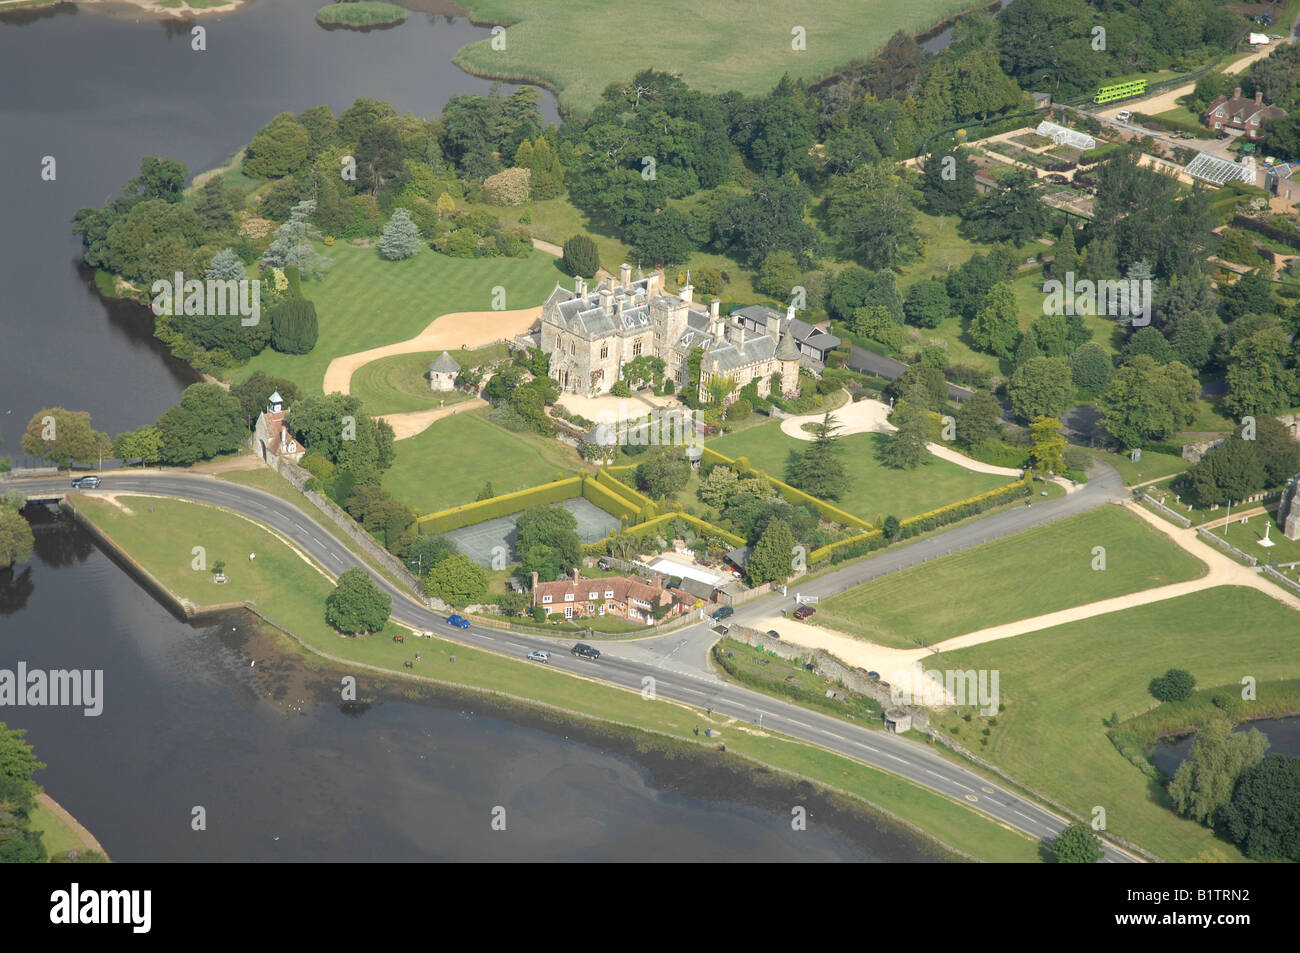 Aerial view of Palace House, Beaulieu in the New Forest, Hampshire. Stock Photo